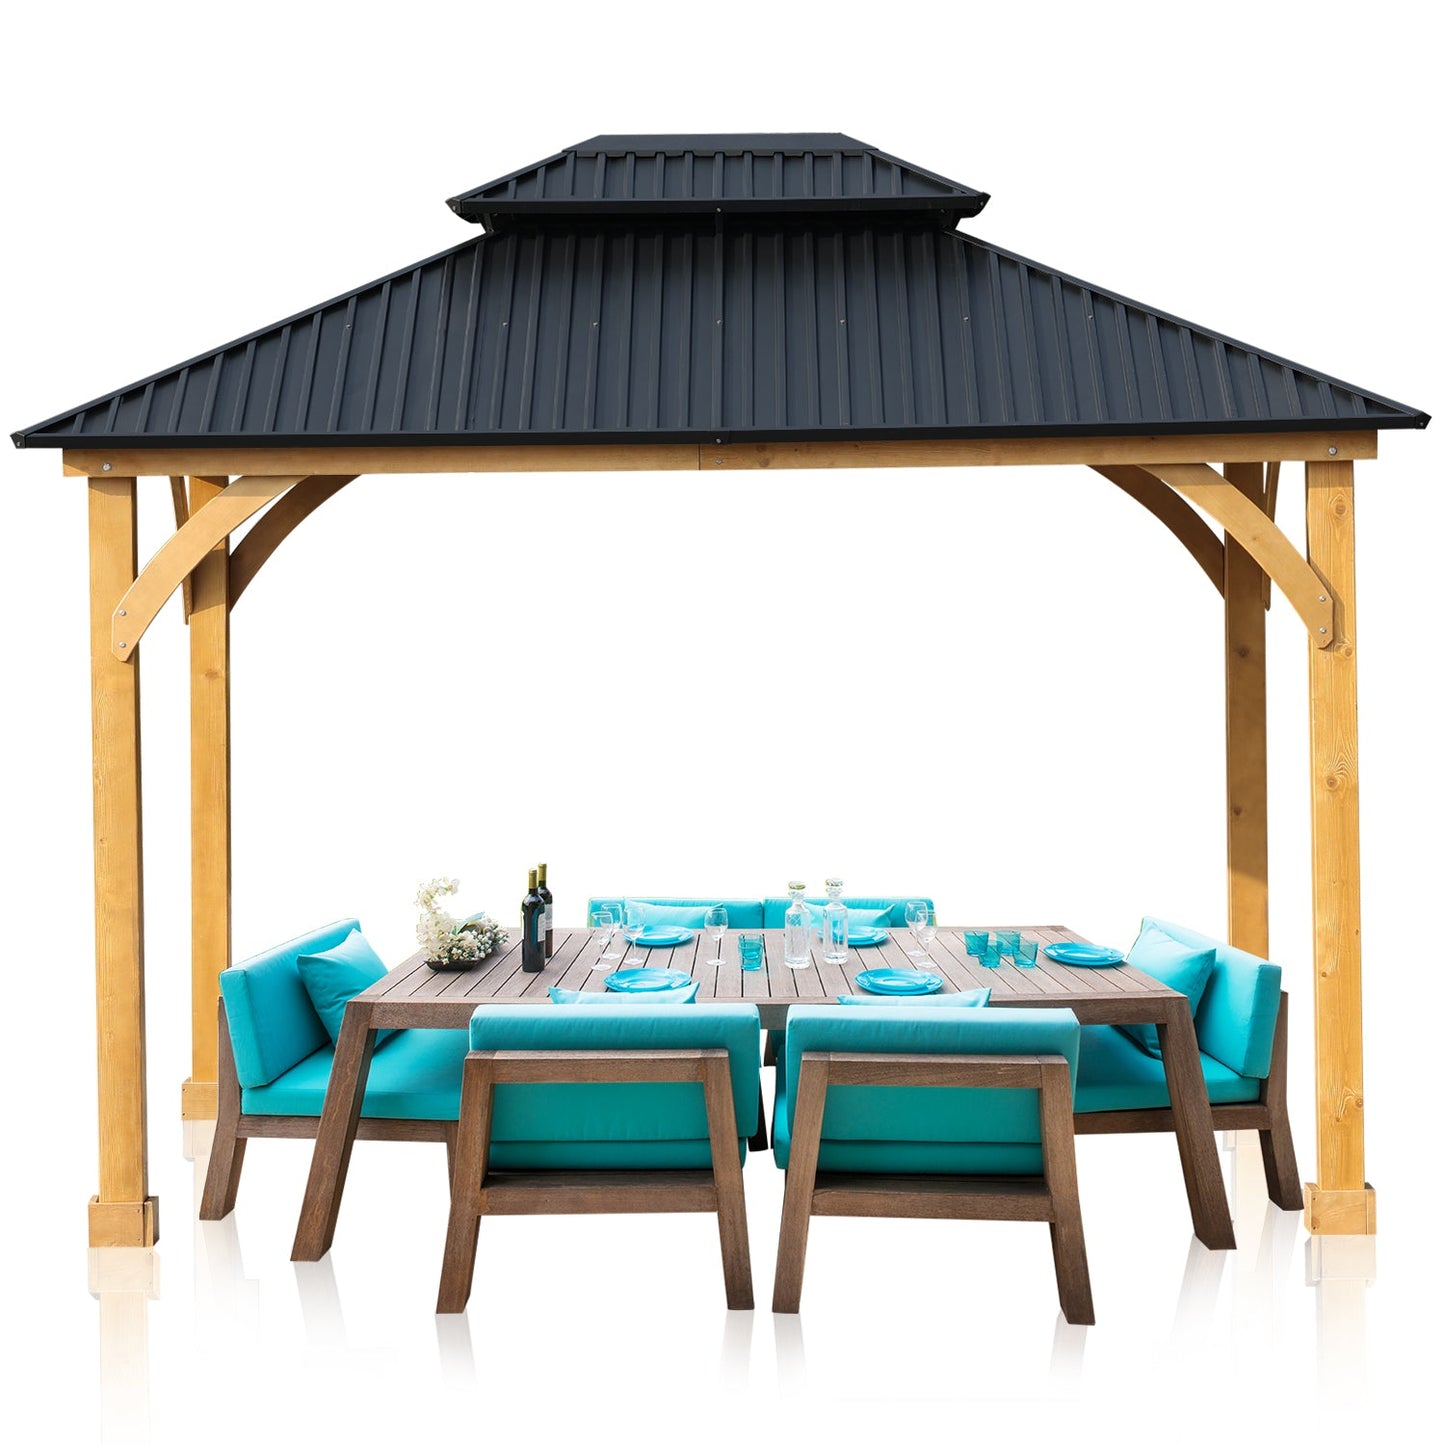 12 x 10 ft. Outdoor Solid Wooden Frame Gazebo with 2-Tier Hardtop Roof Gazebo Aoodor Charcoal  